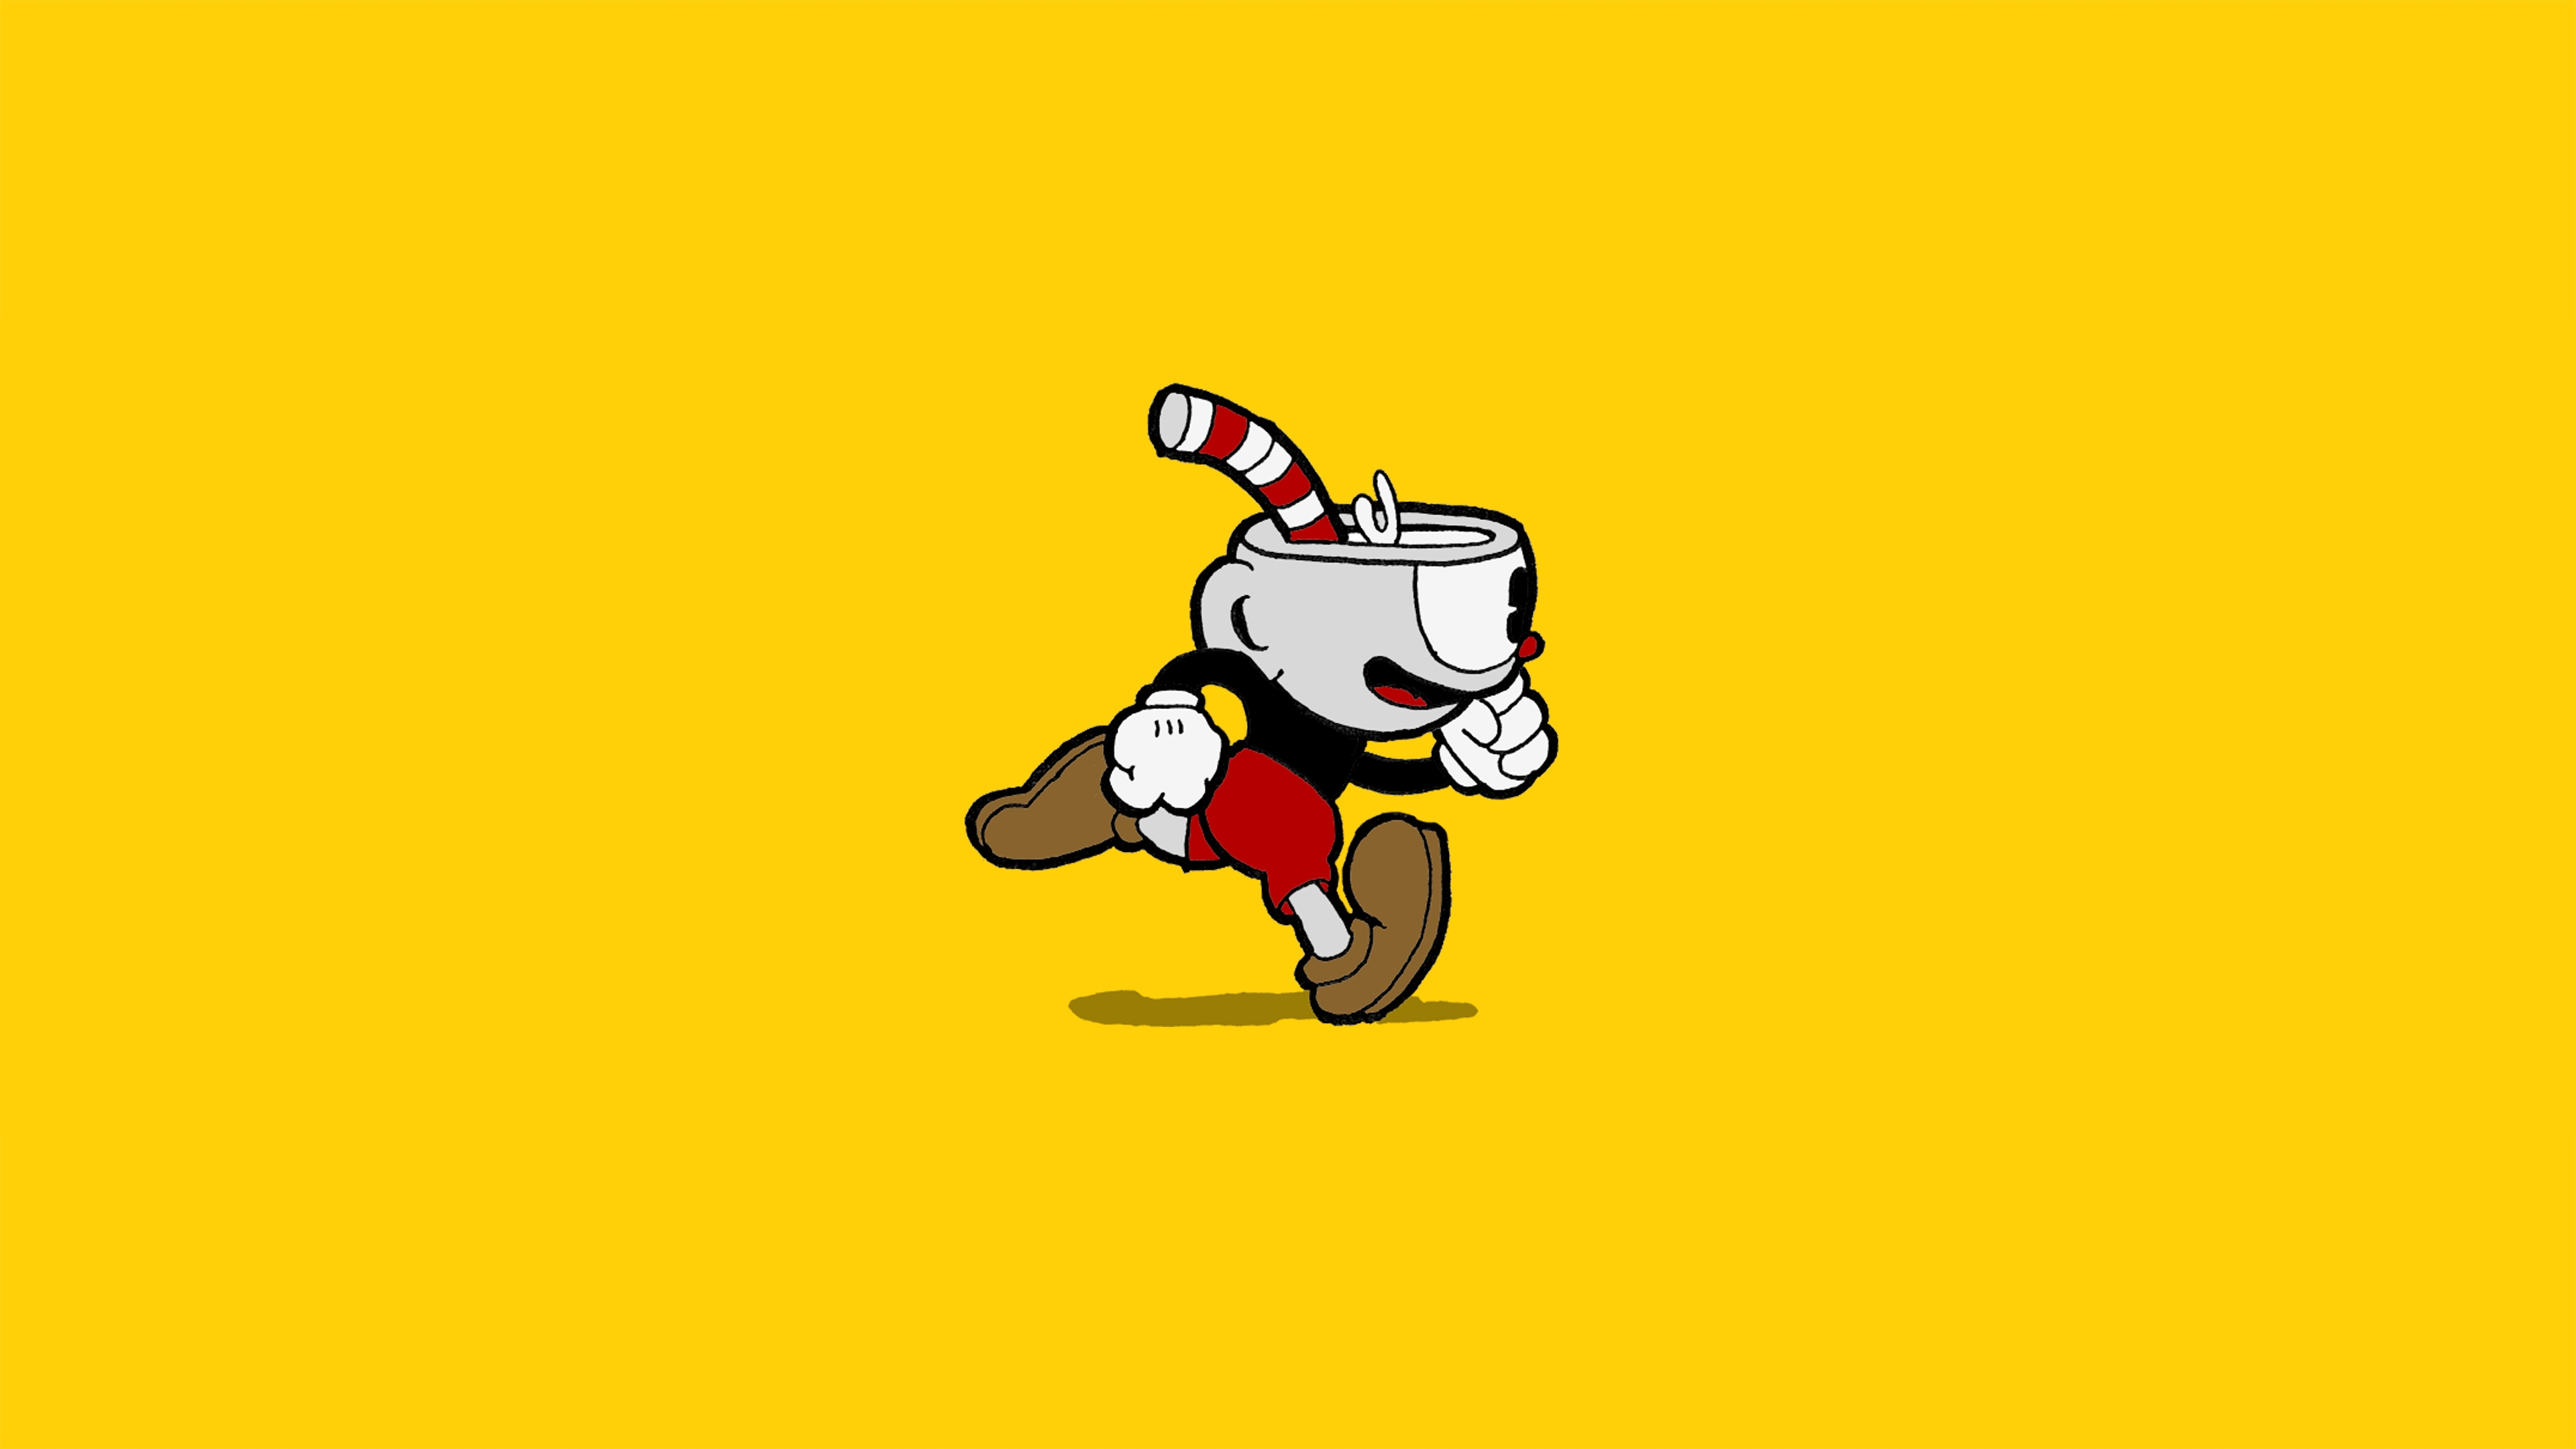 Wallpapers cuphead video game video games miscellaneous on the desktop